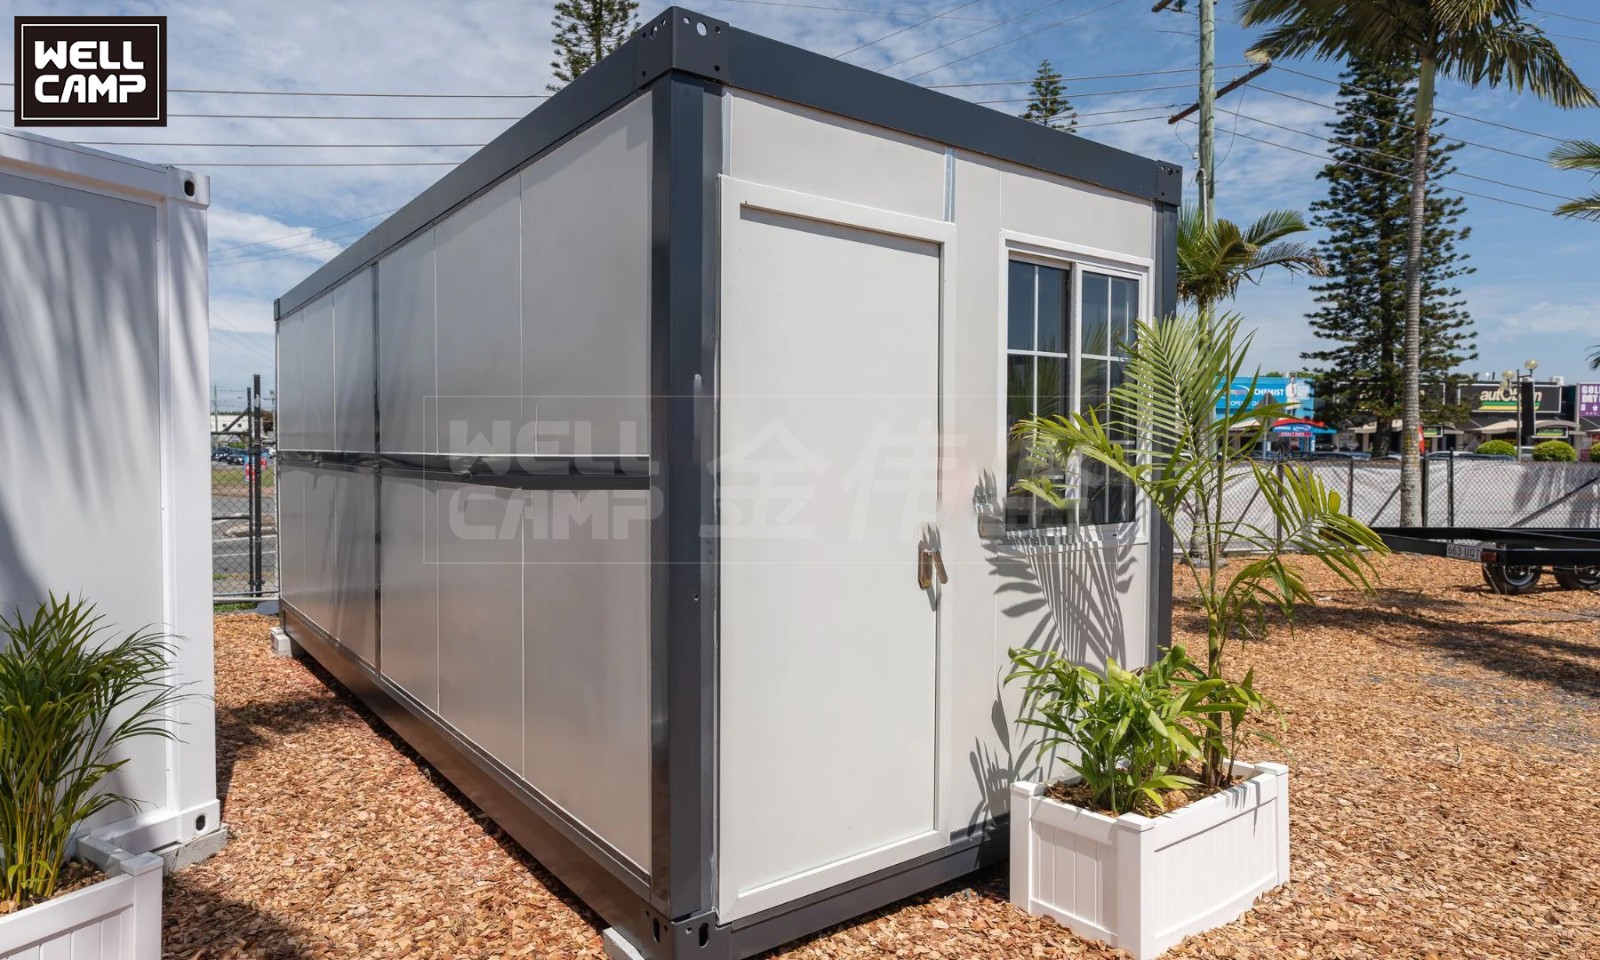 product-WELLCAMP-WELLCAMP Folding House Folding Container House prefabricated flat pack folding cont